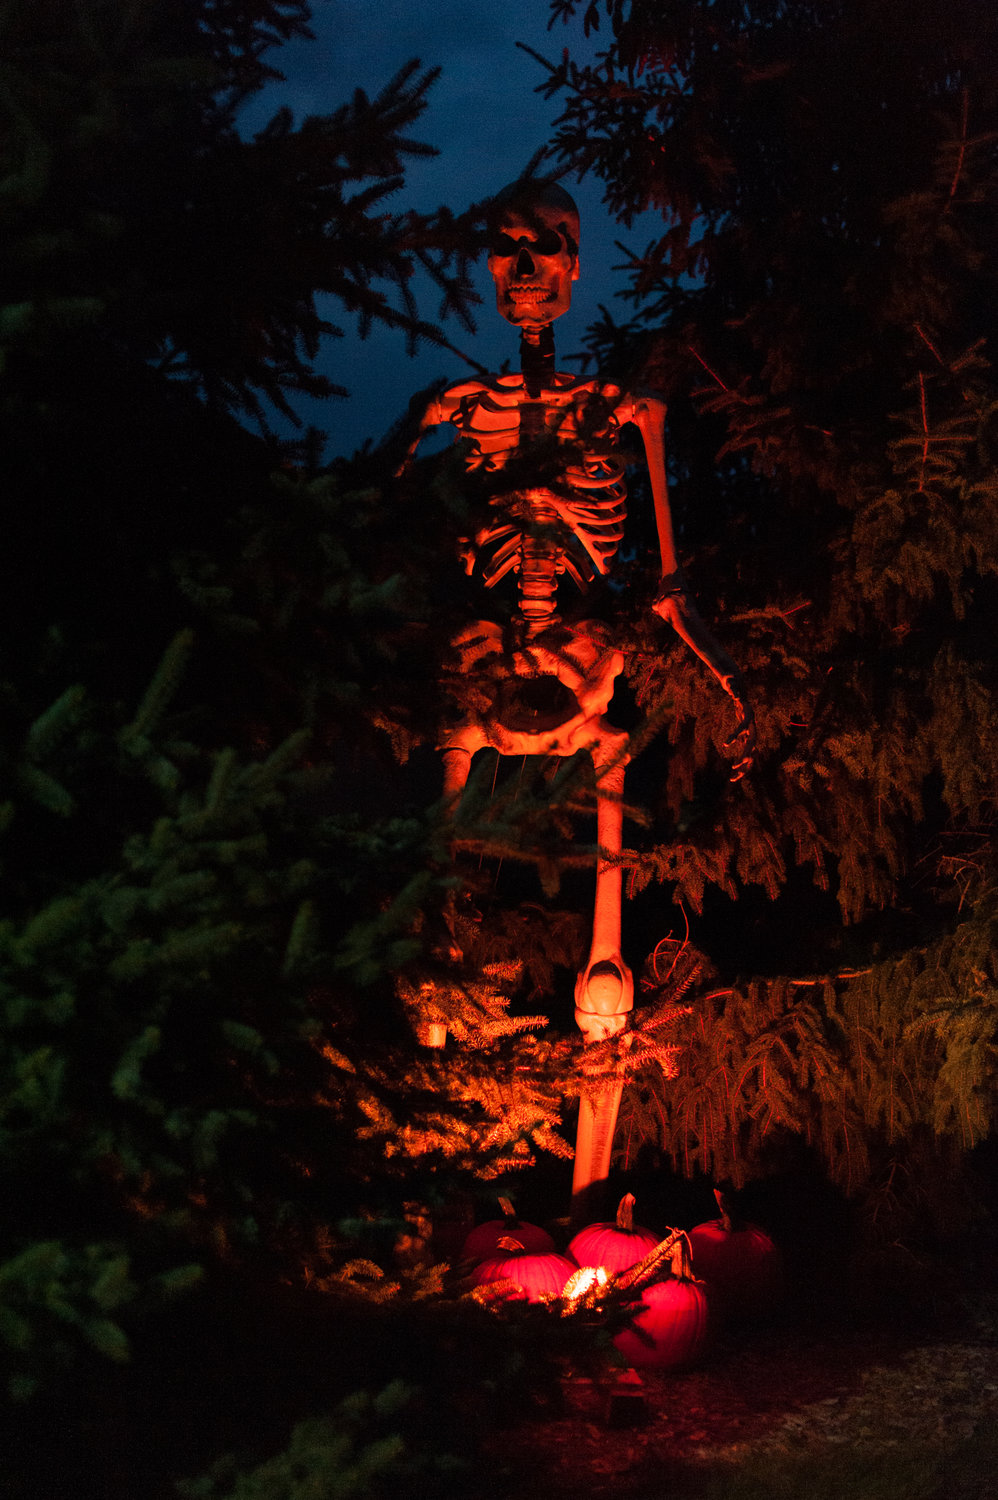 Wind your way through a skeleton graveyard….if you dare!